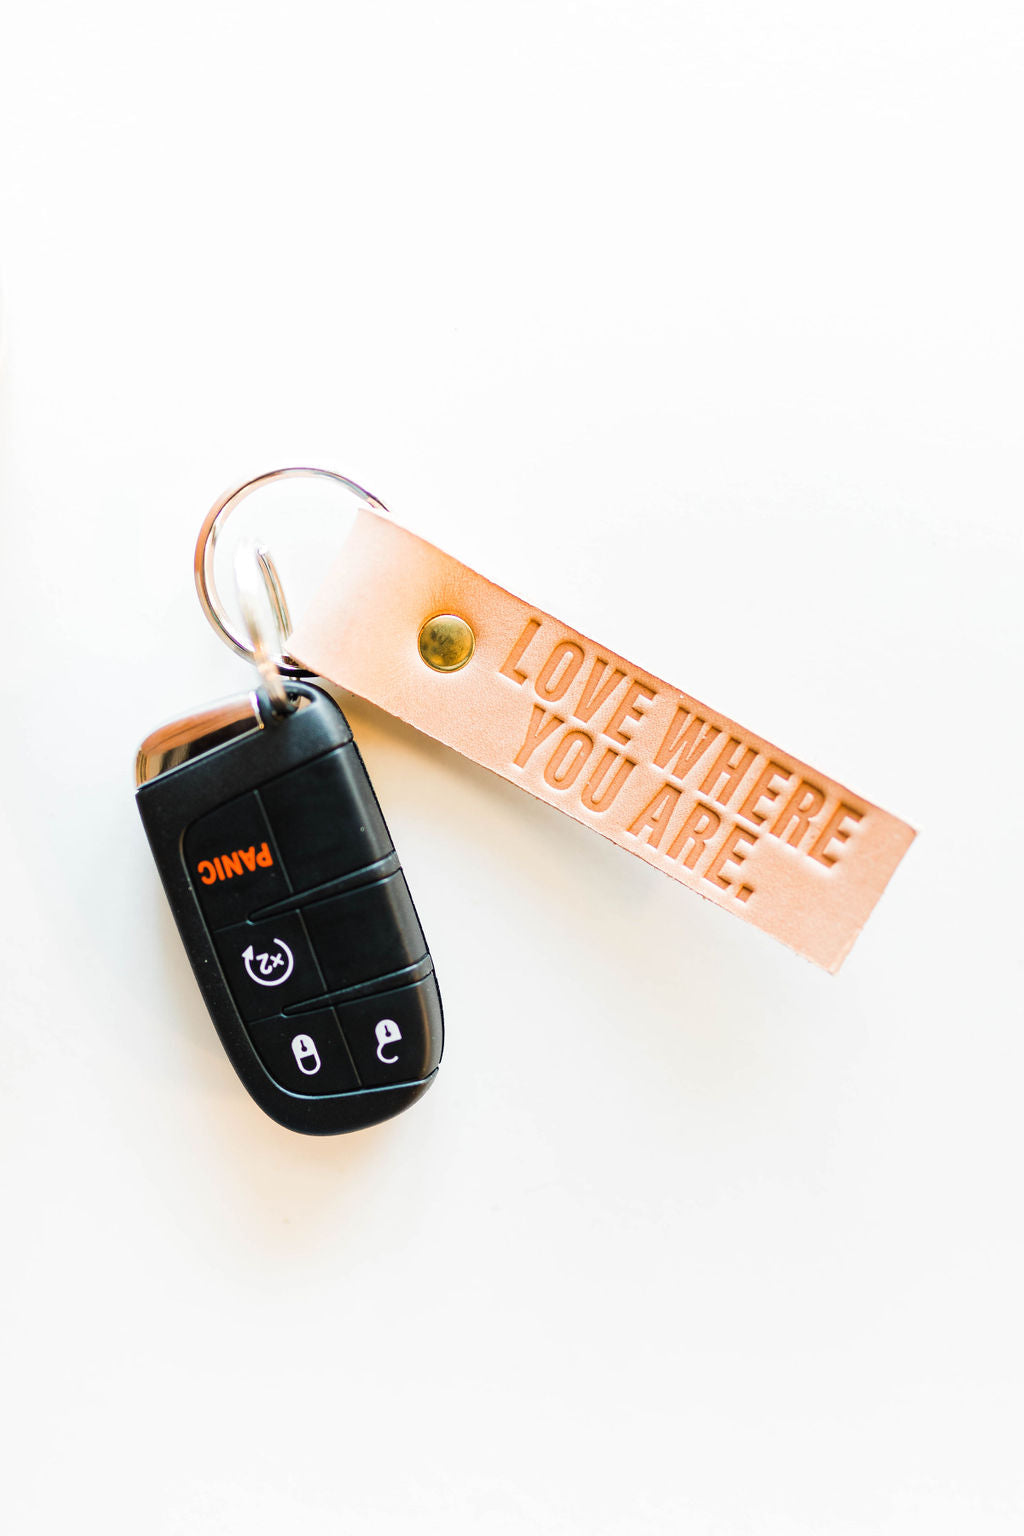 Leather Key Fob | Love Where You Are - ramble-and-company.myshopify.com - Accessories